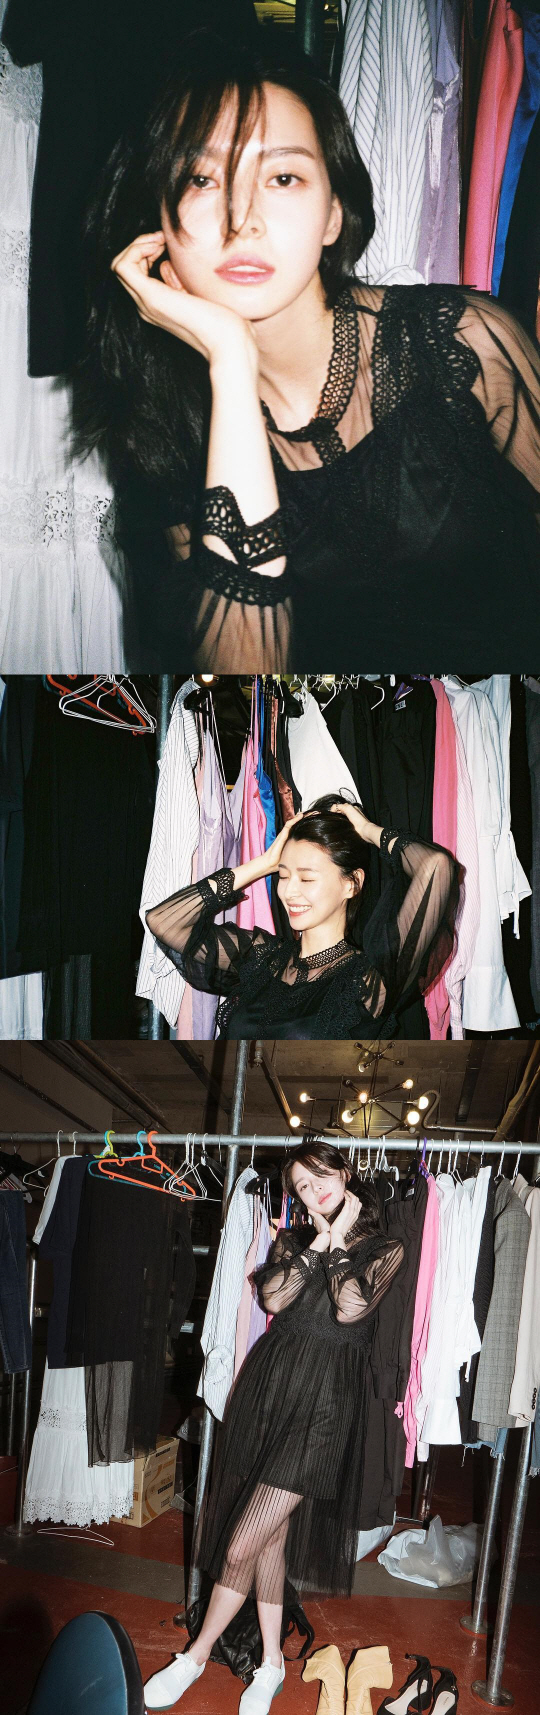 Actor and singer Europe has released a pictorial routine.Europe posted several photos on his SNS on the 25th, which seemed to be taken in the wardrobe.In the photo, Europe is showing off her unique visuals in a black See through dress.Europe was acclaimed for his impressive performance as actor Choi Youra, who played the role of Song Sae-byeok in the TVN drama My Uncle which last May.